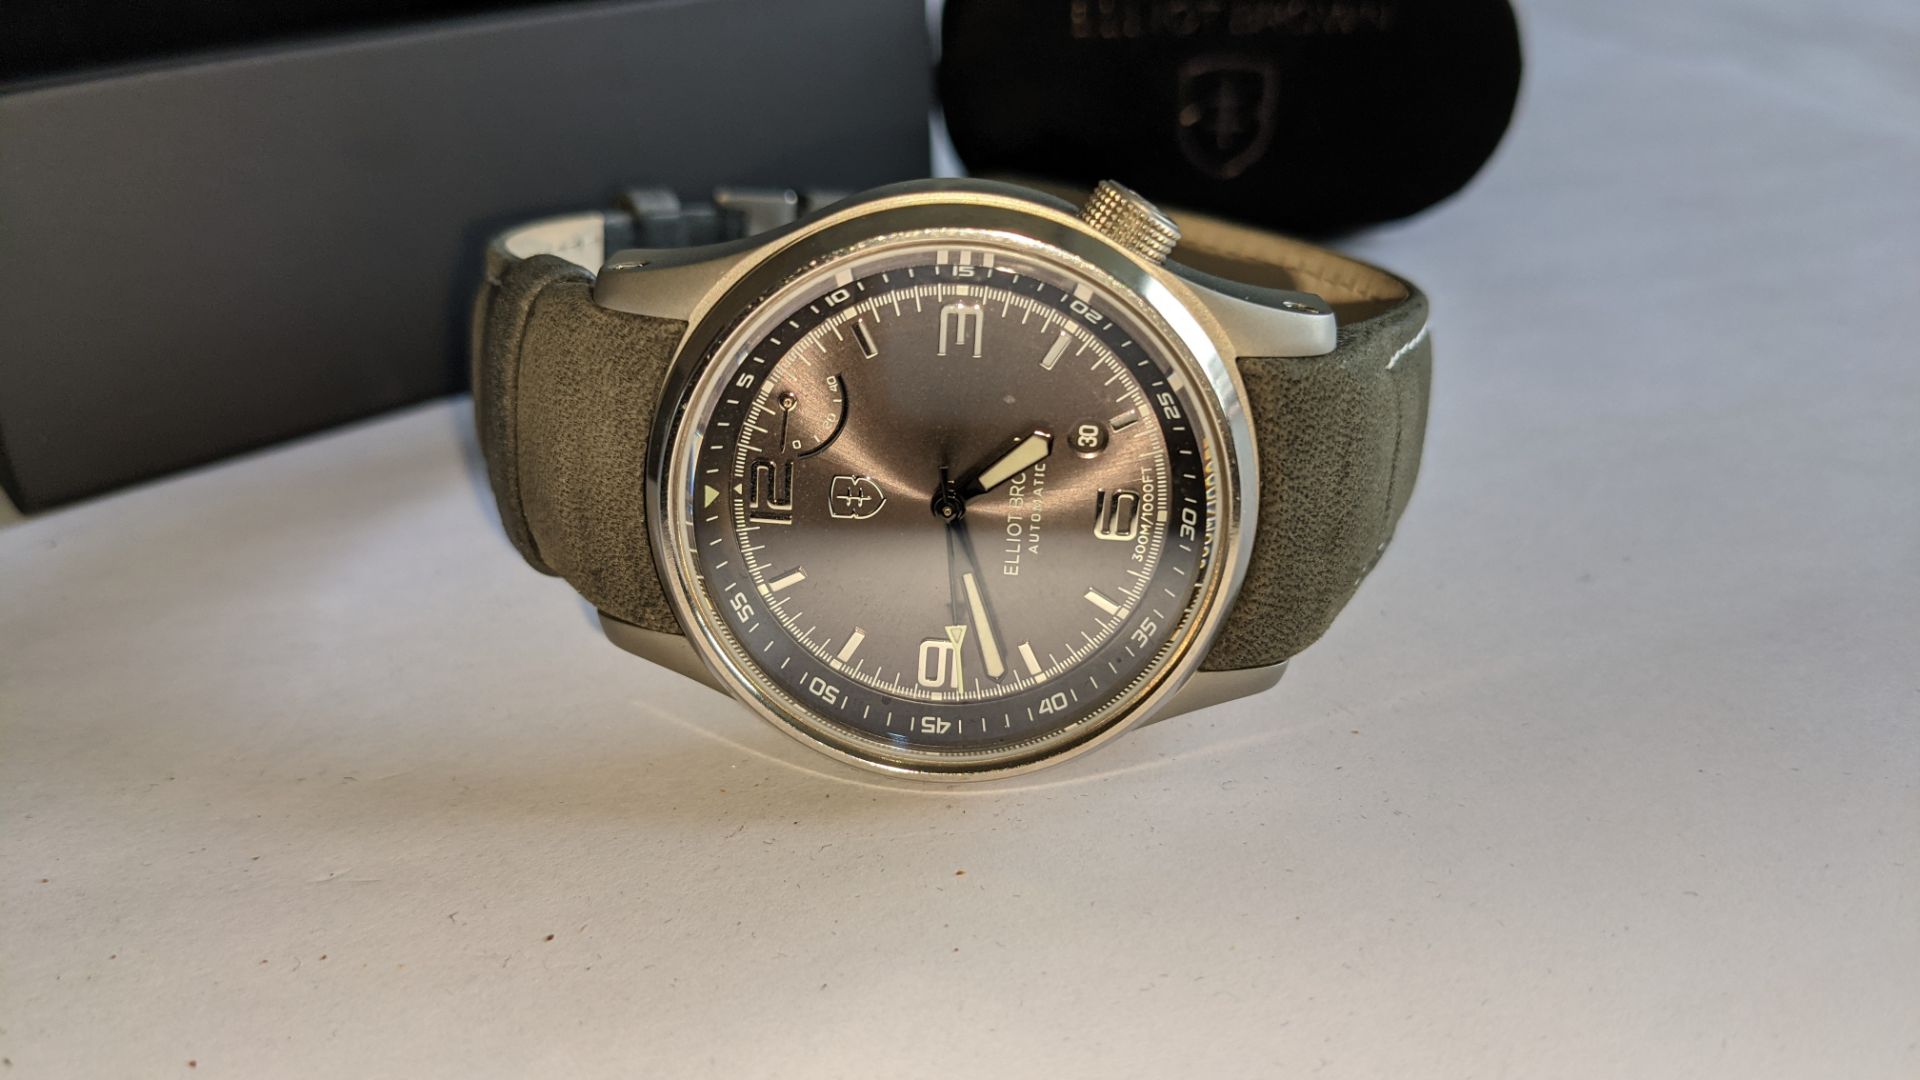 Elliott Brown Tyneham Limited Edition automatic watch, 5 of 500, product code 305-D05-L15. Stainles - Image 11 of 22